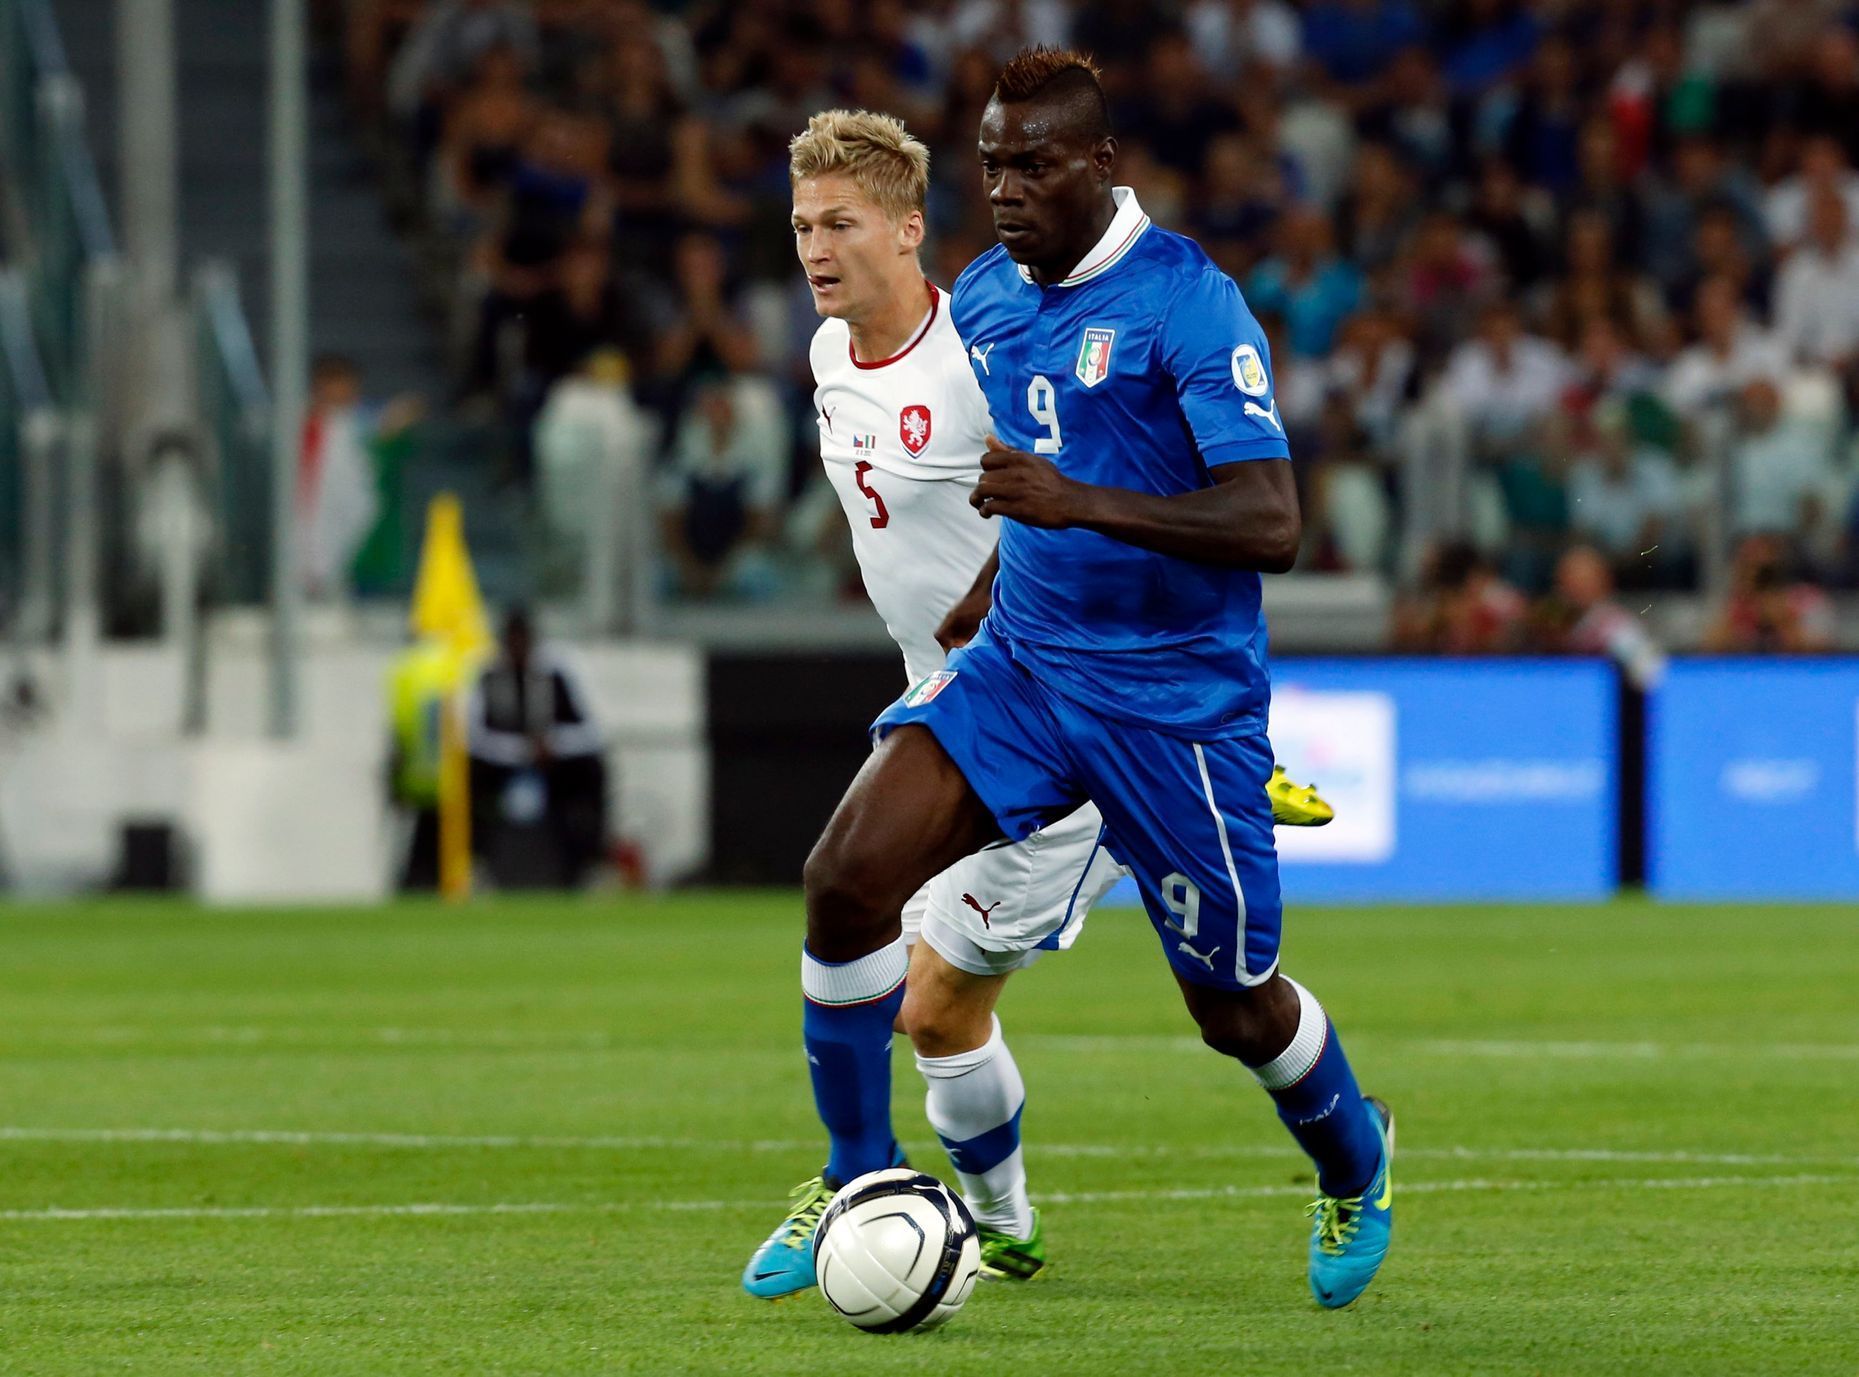 Italy's Balotelli challenges Czech Republic's Prochazka during their 2014 World Cup qualifying soccer match at the Juventus stadium in Turin